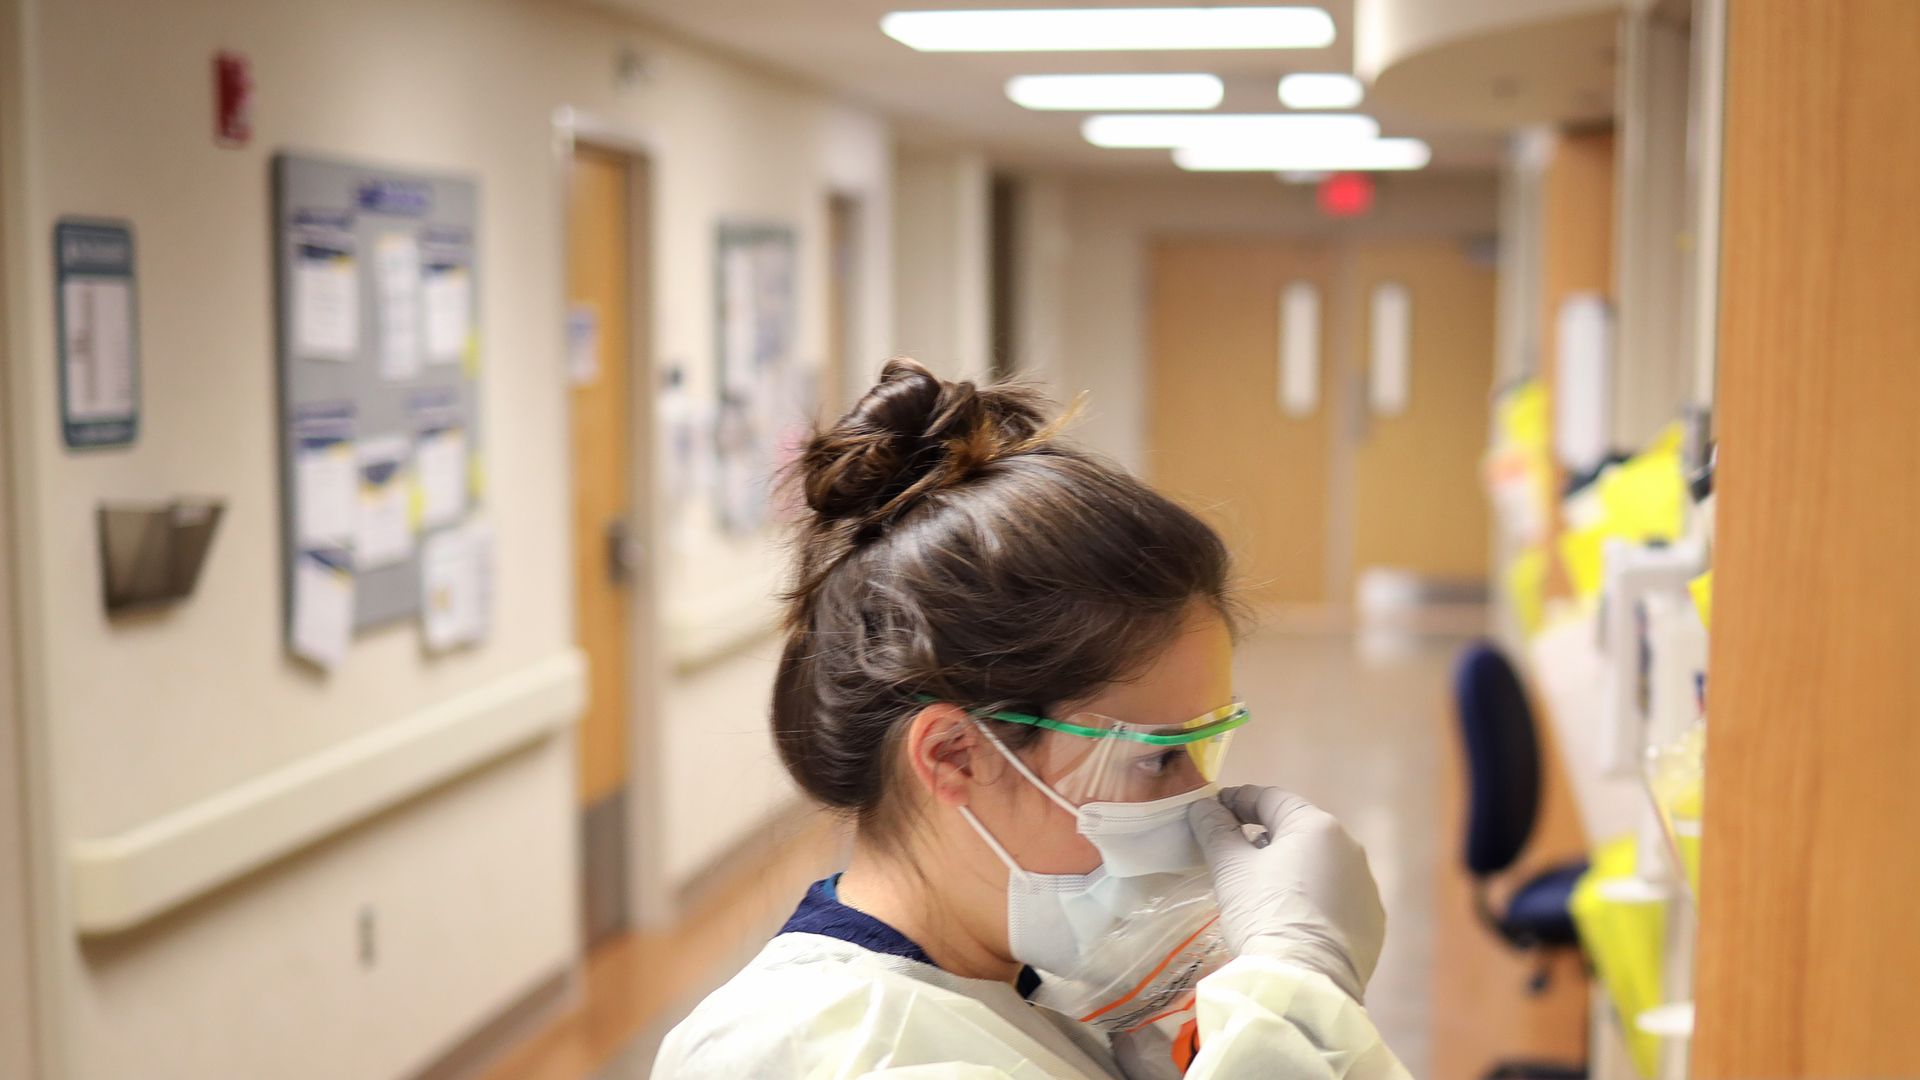 A nurse wearing a face mask standing in an intensive care unit.